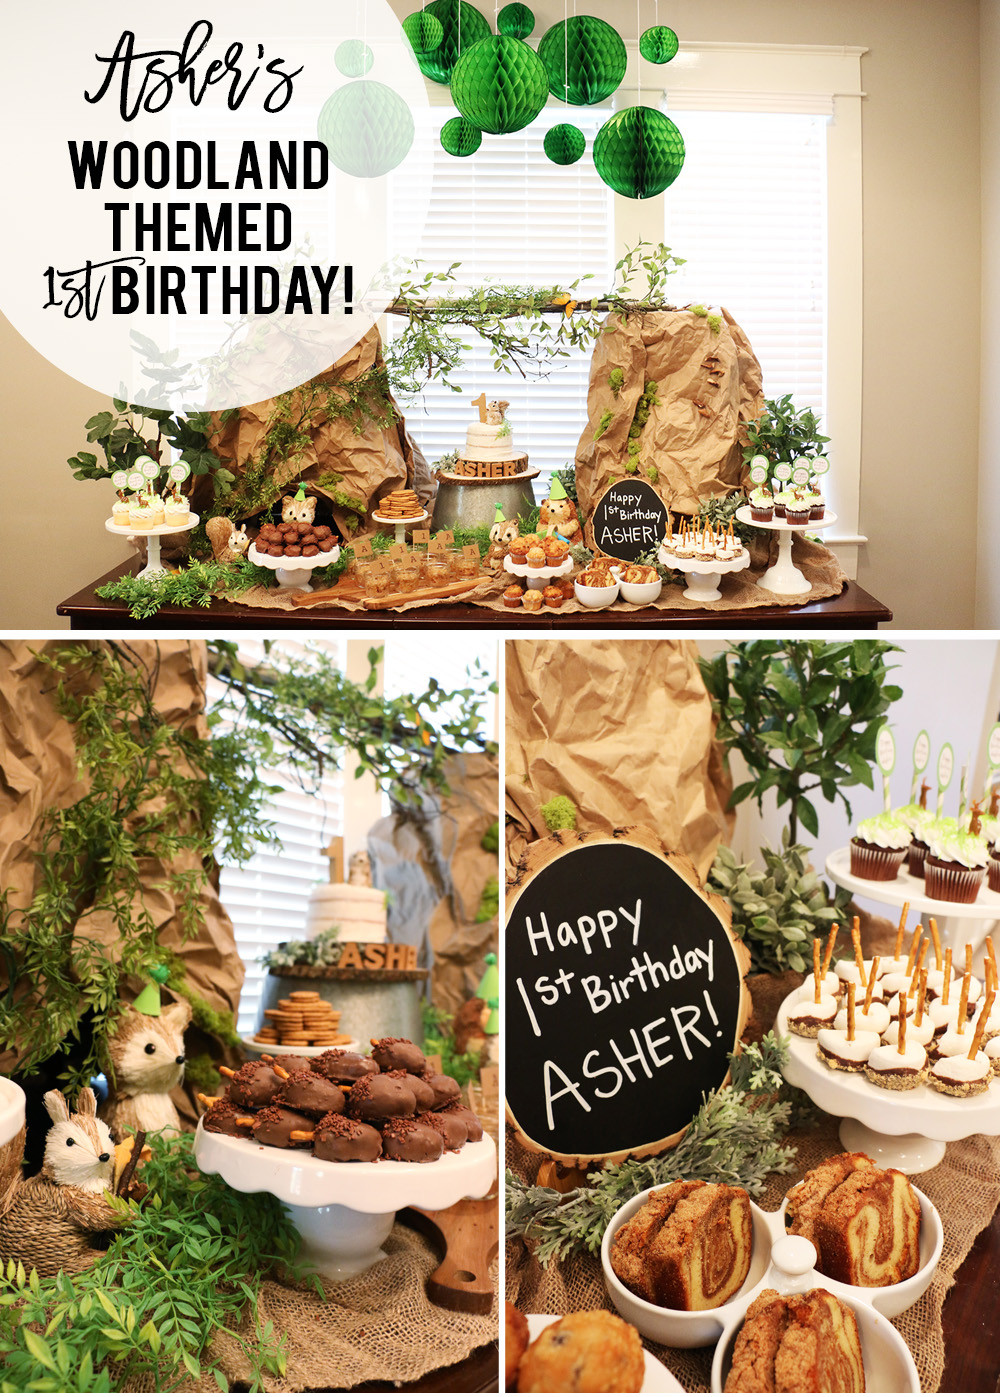 Woodland Birthday Party Food Ideas
 Asher’s Woodland Themed First Birthday – At Home With Natalie